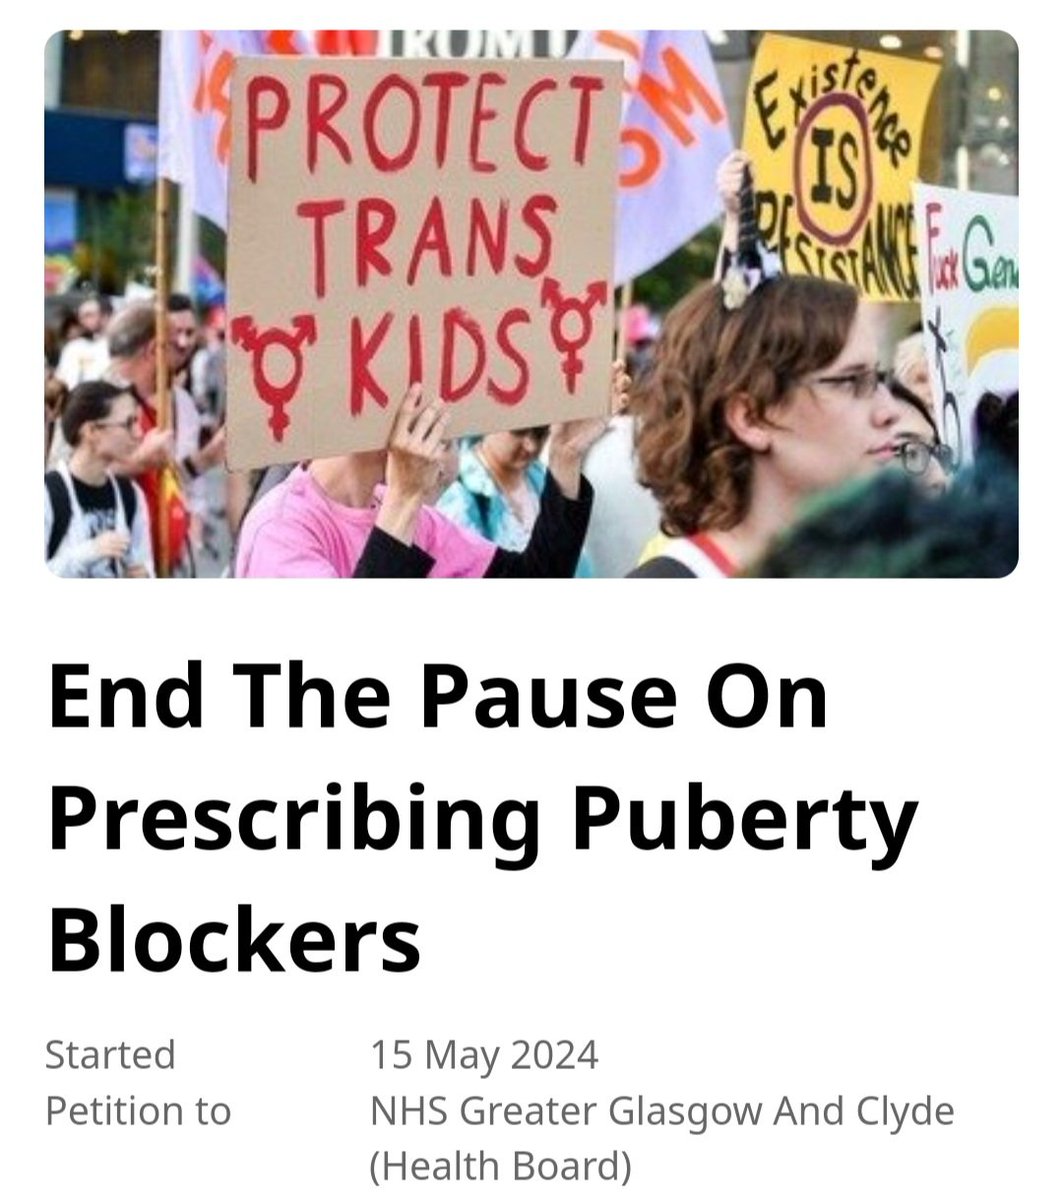 When I get this petition to 10,000 signatures, I will personally hand it in to Sandyford. Please help me by sharing it everywhere. Tell everyone. We will not be silent. Trans kids deserve to live!! ✊️🏳️‍⚧️ chng.it/nKbcKKNnYV